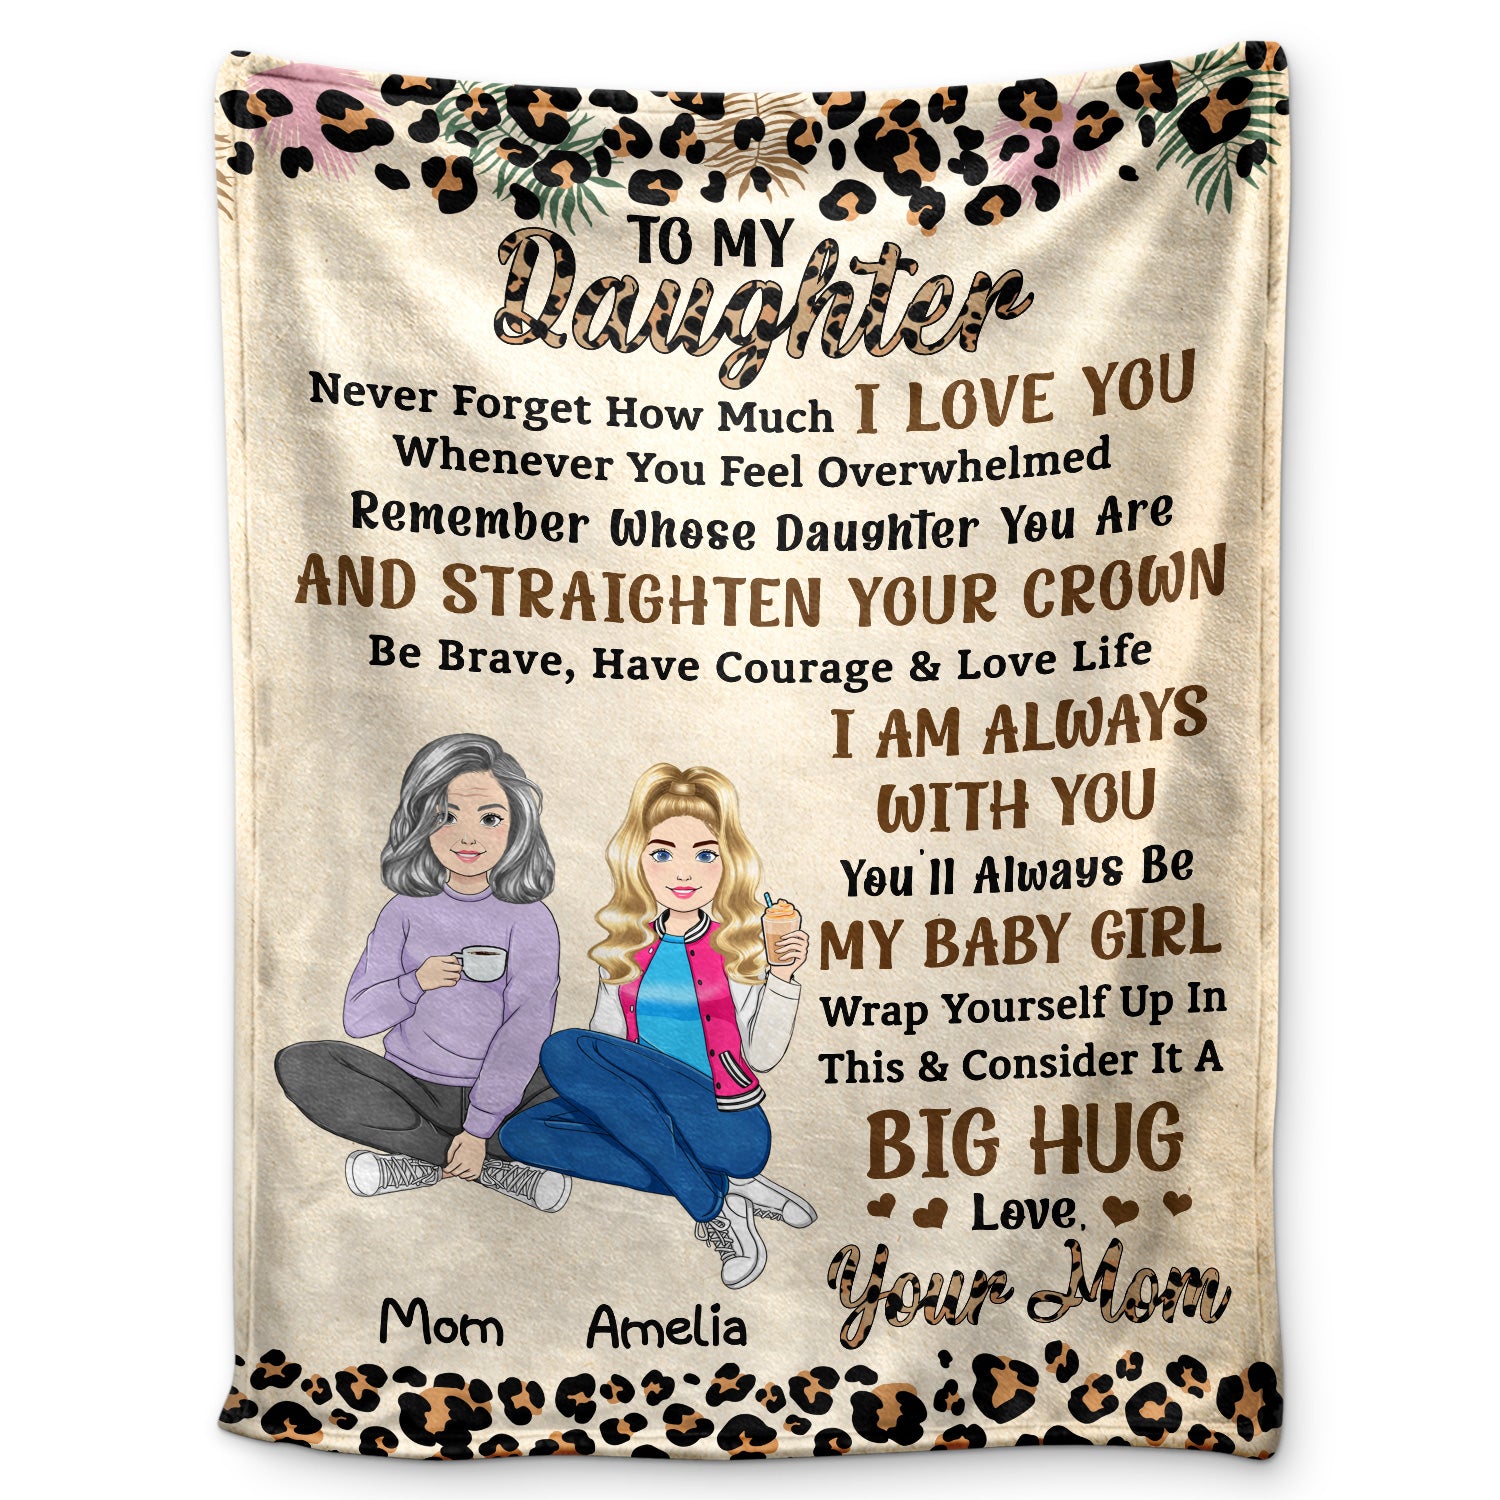 Never Forget How Much I Love You Leopard Pattern Mom - Gift For Daughters - Personalized Fleece Blanket, Sherpa Blanket